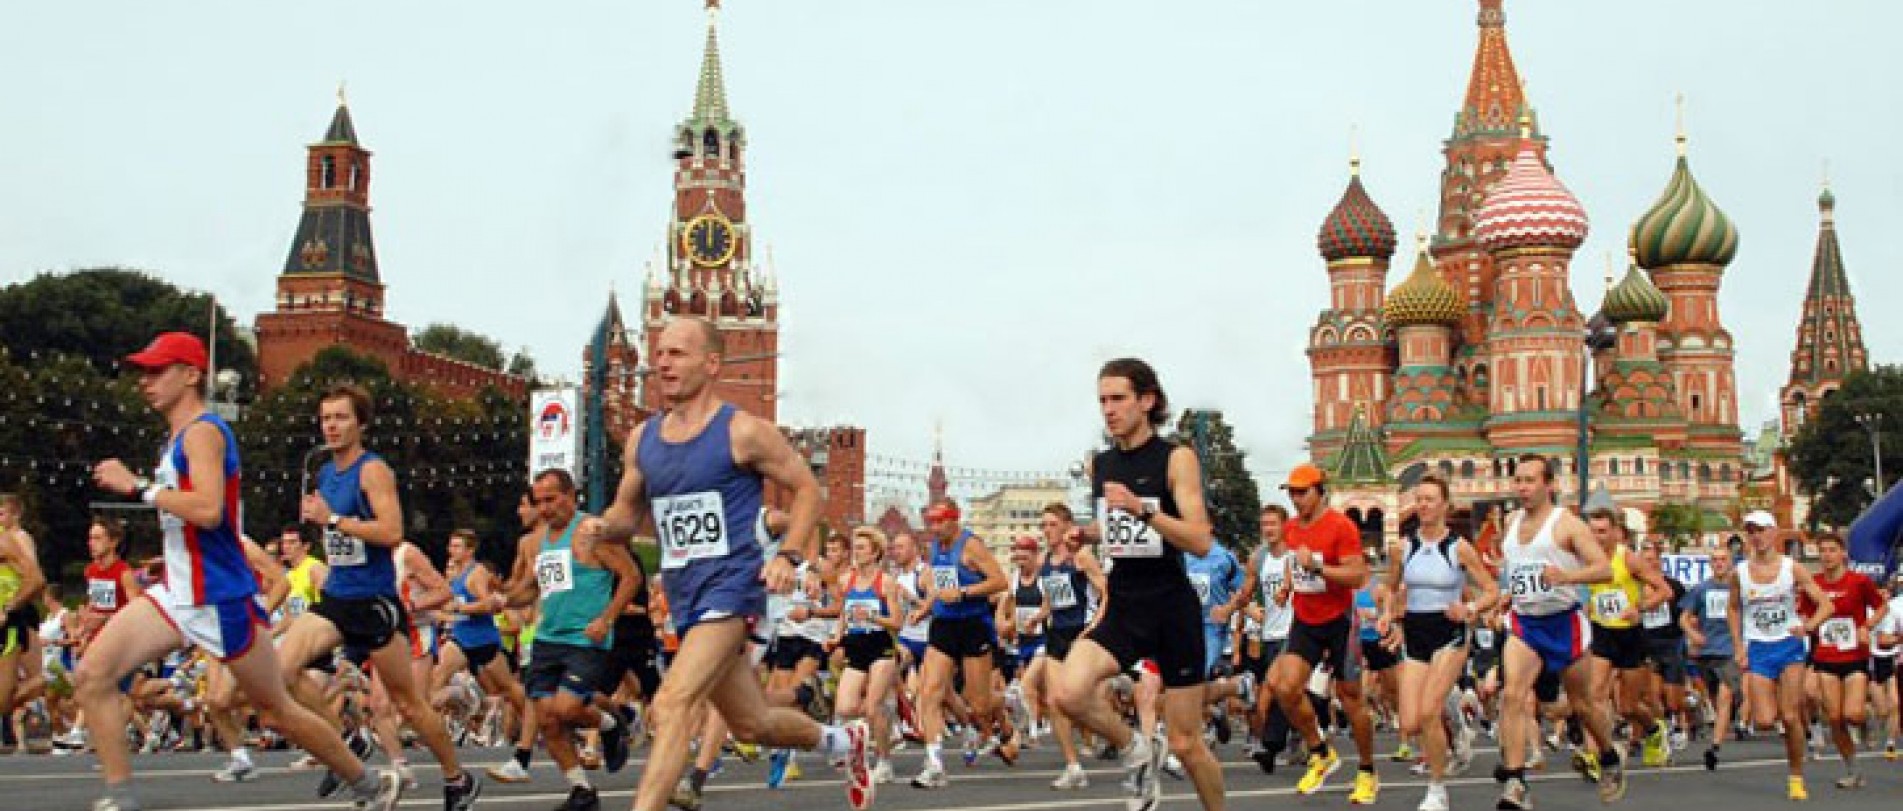 The 2020 Moscow Marathon set to be run as planned on September 20